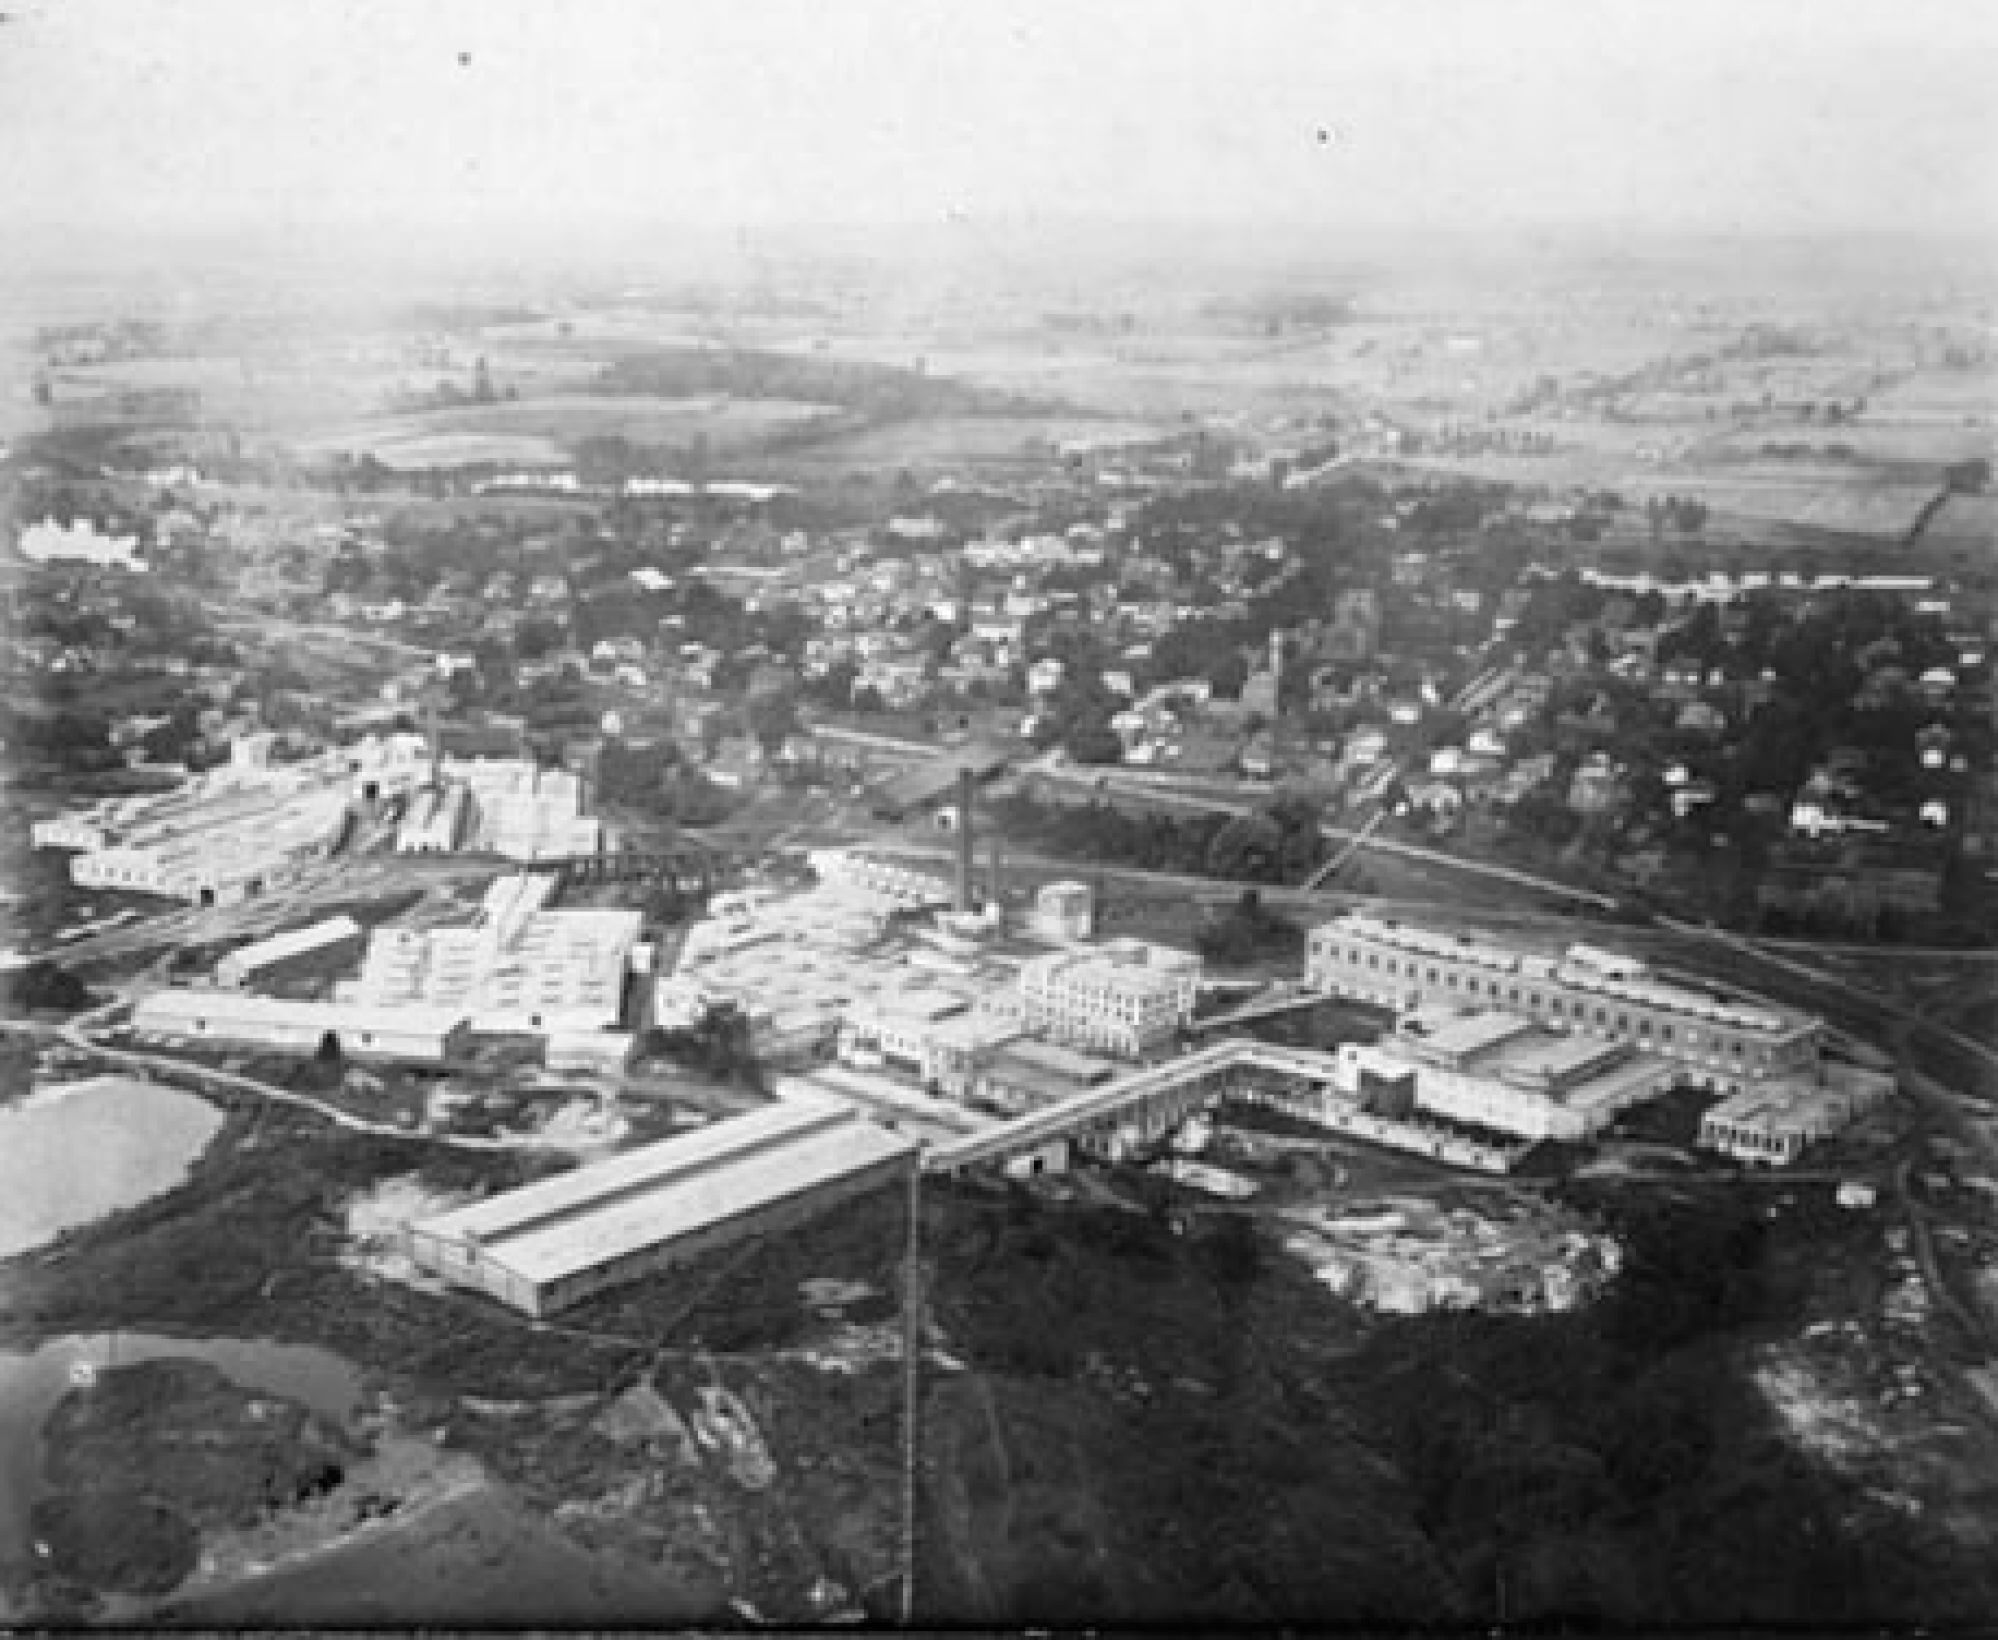 Aerial view showing a factory/industrial complex with several connecting buildings. Roadways are visible as are homes in a residential area in the background of the image.